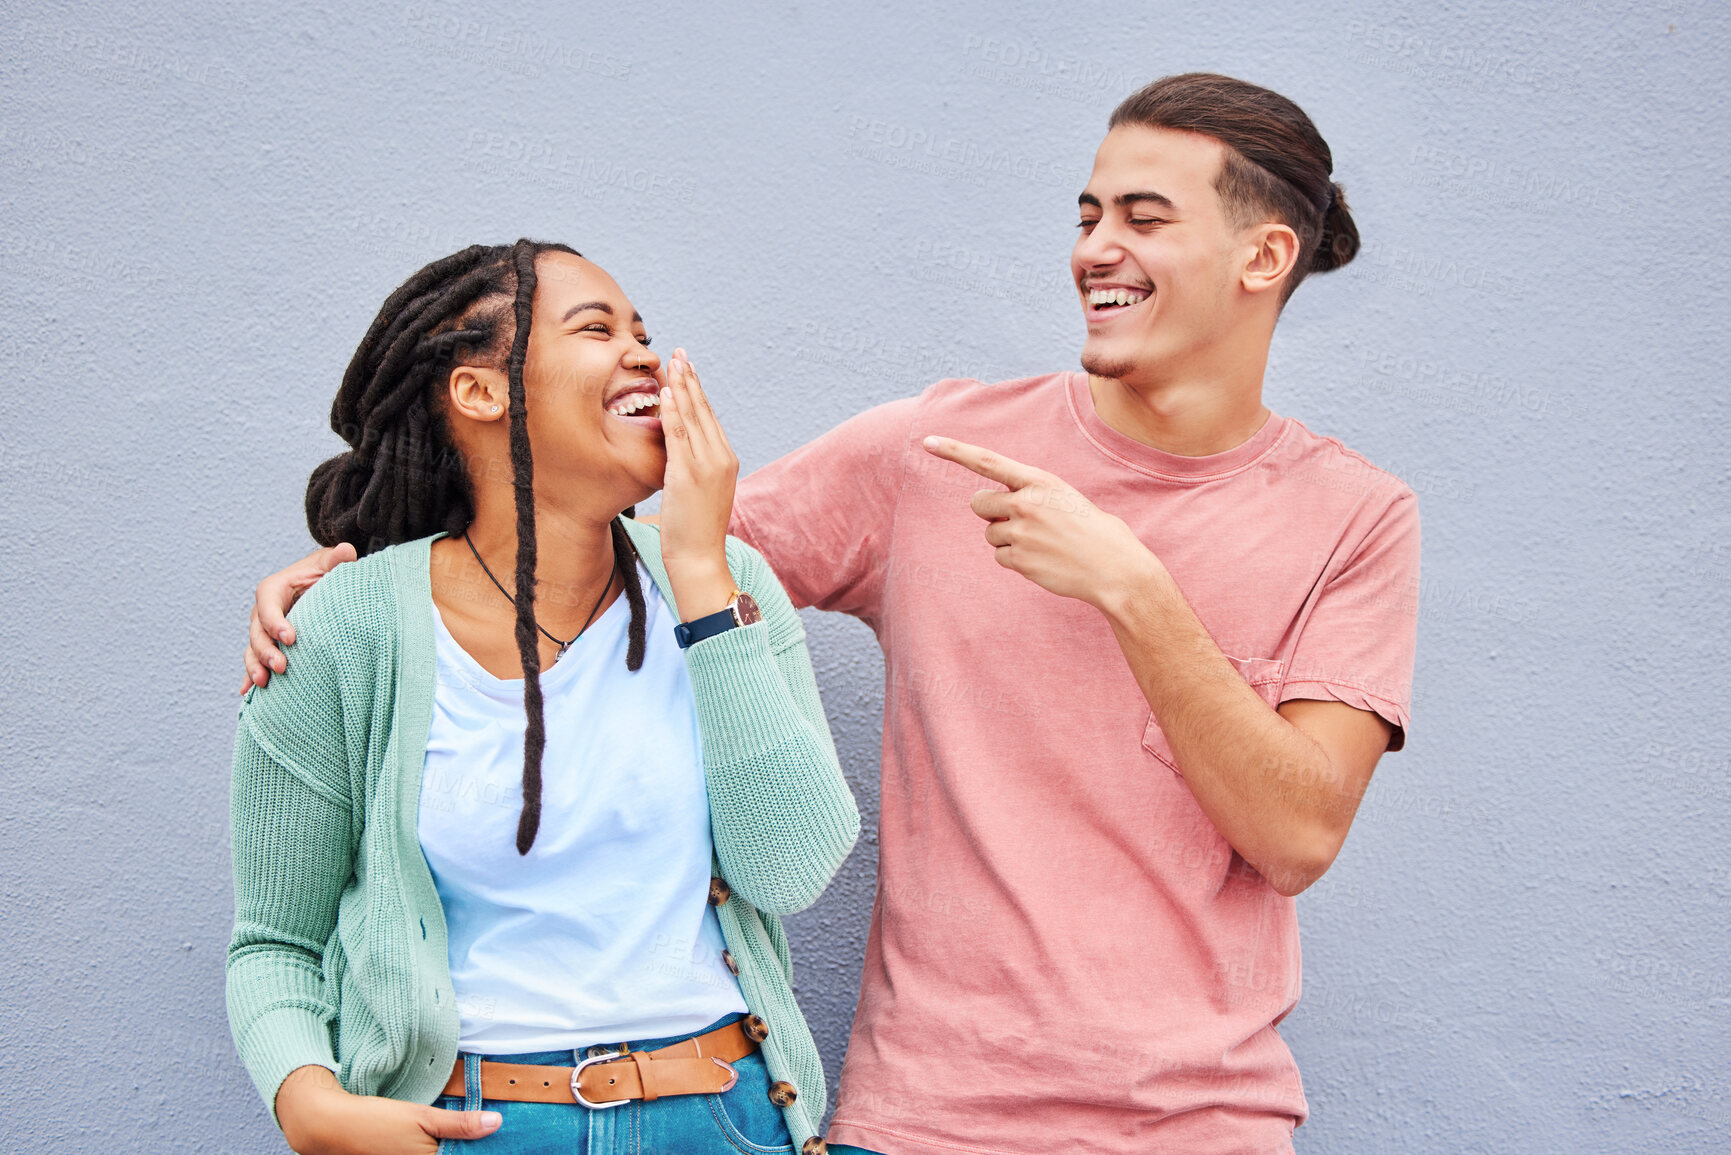 Buy stock photo Joking, laugh and happy with a couple on a gray background, outdoor for fun or freedom together. Laughing, humor or smile with a young man and woman enjoying laughter while bonding against a wall